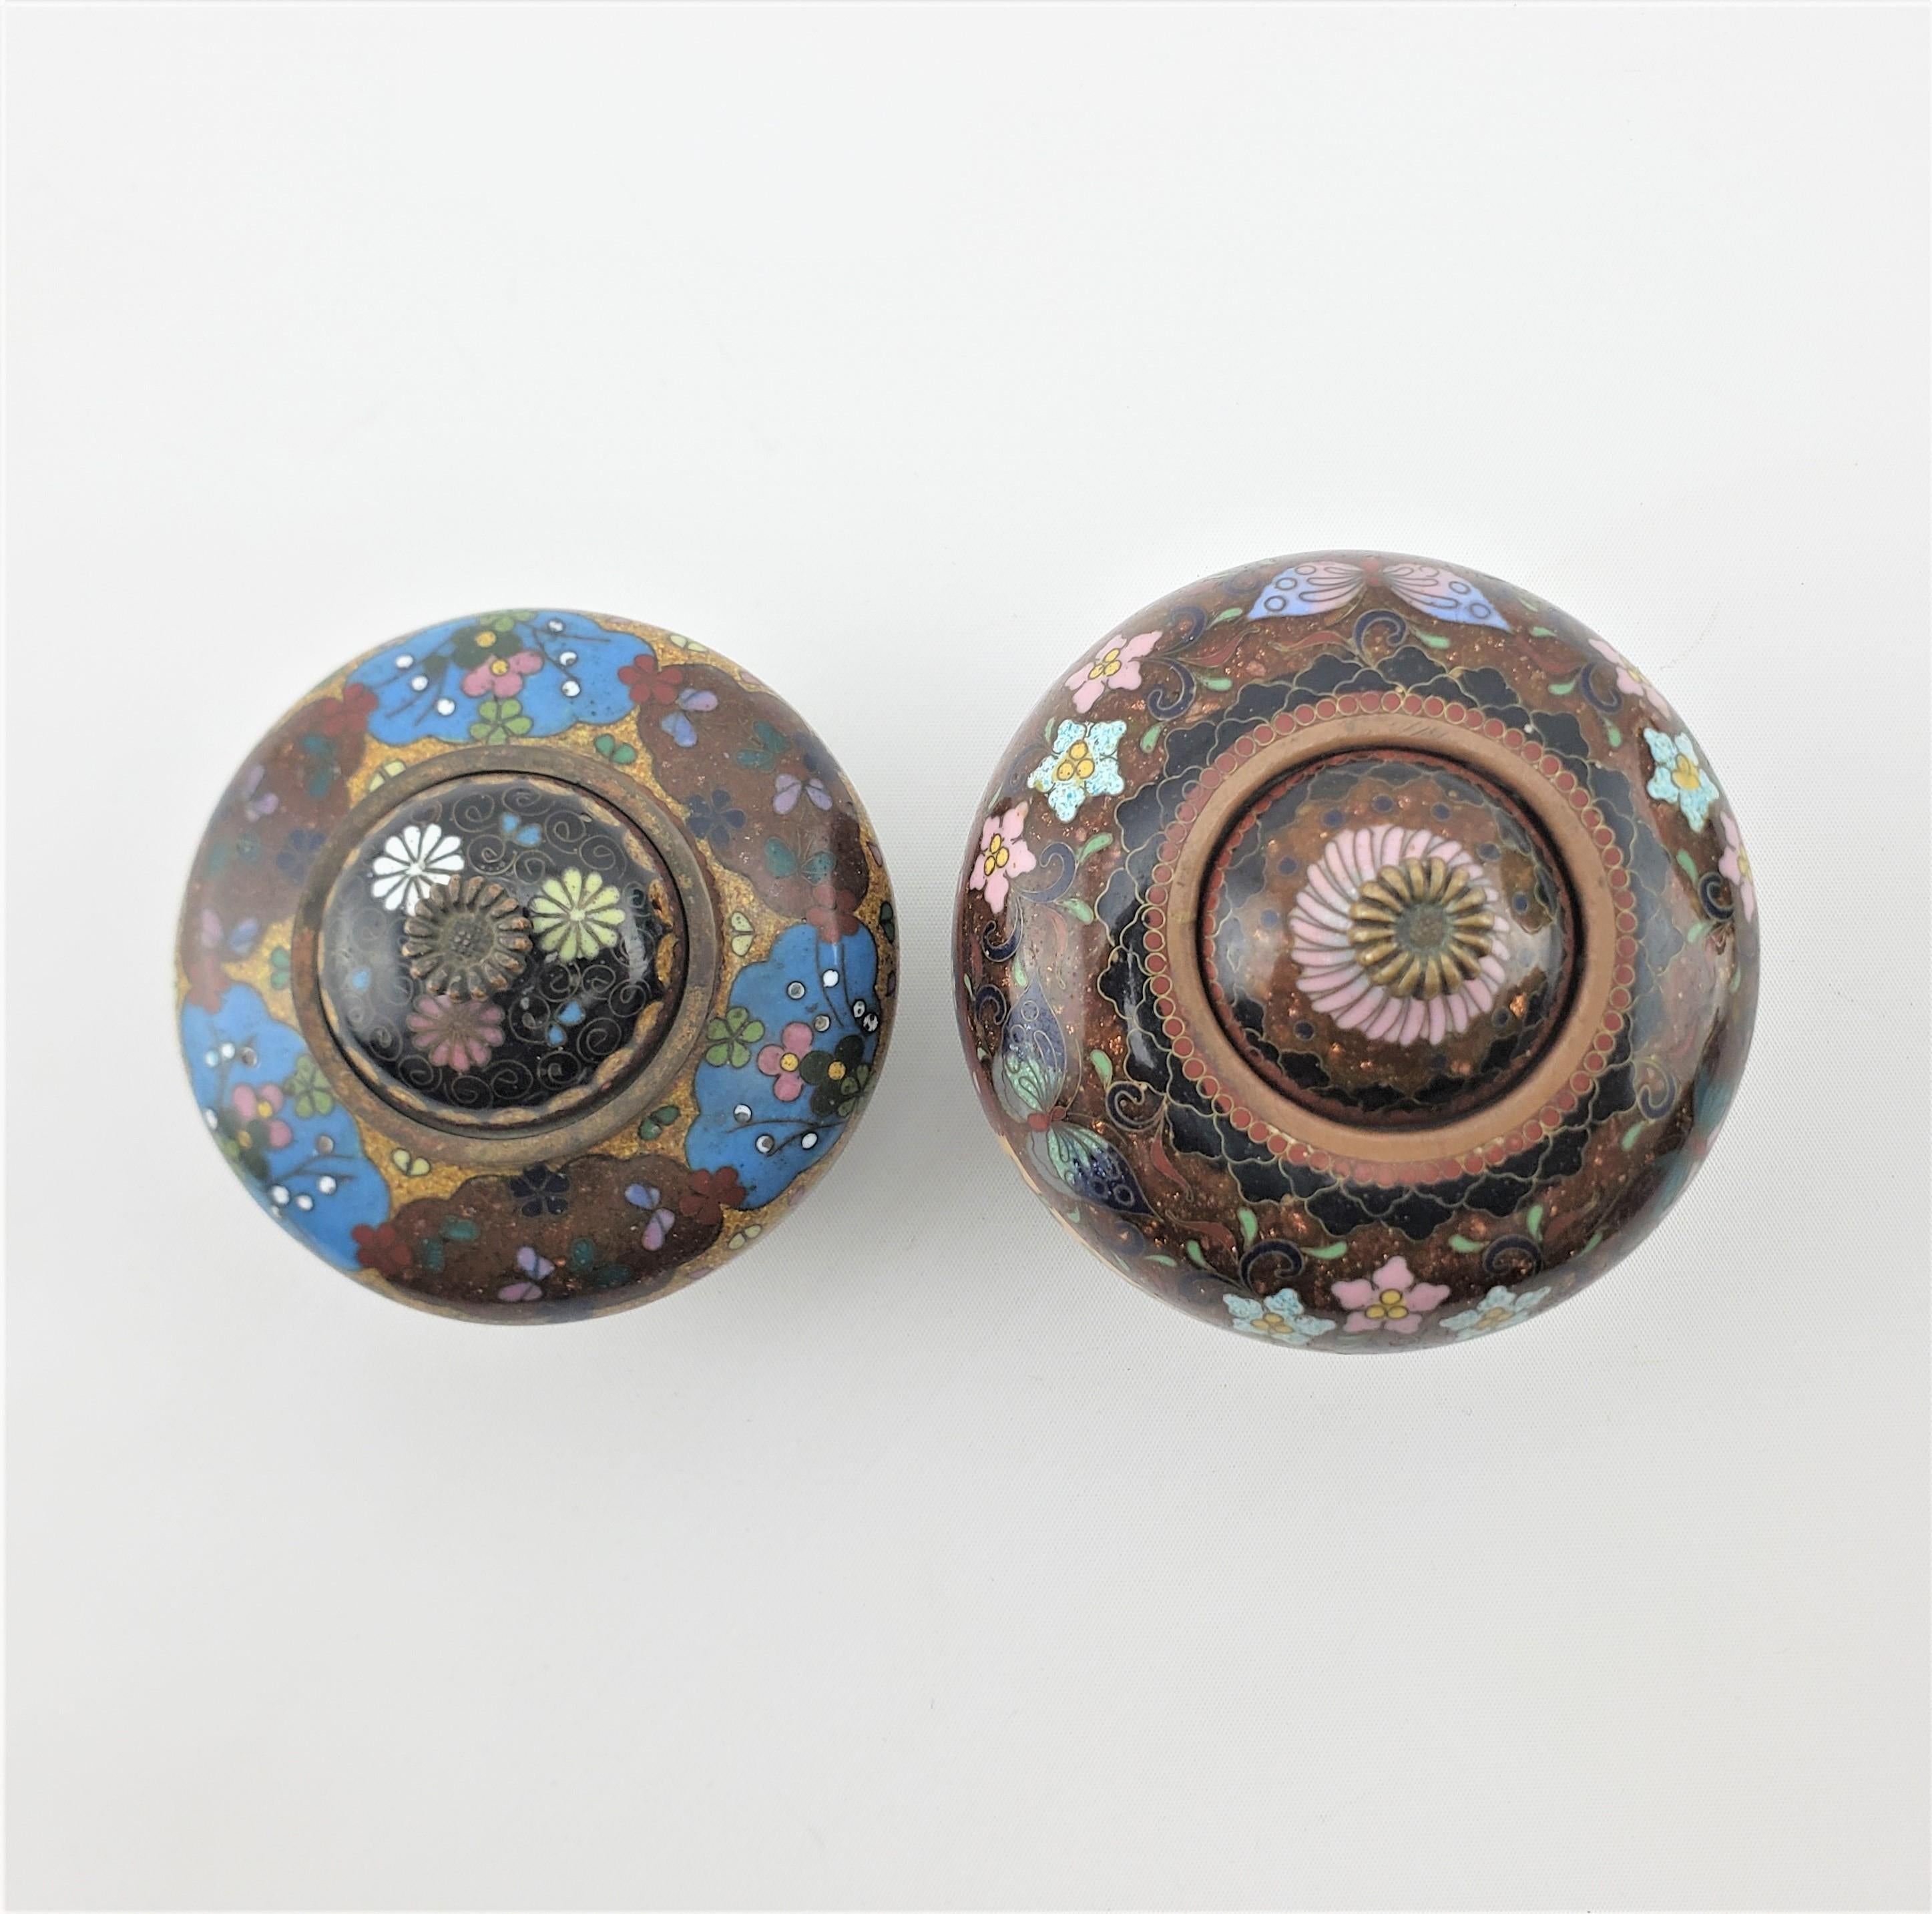 Metal Pair of Antique Japanese Cloisonne Covered Jars with Floral Motif Decoration For Sale